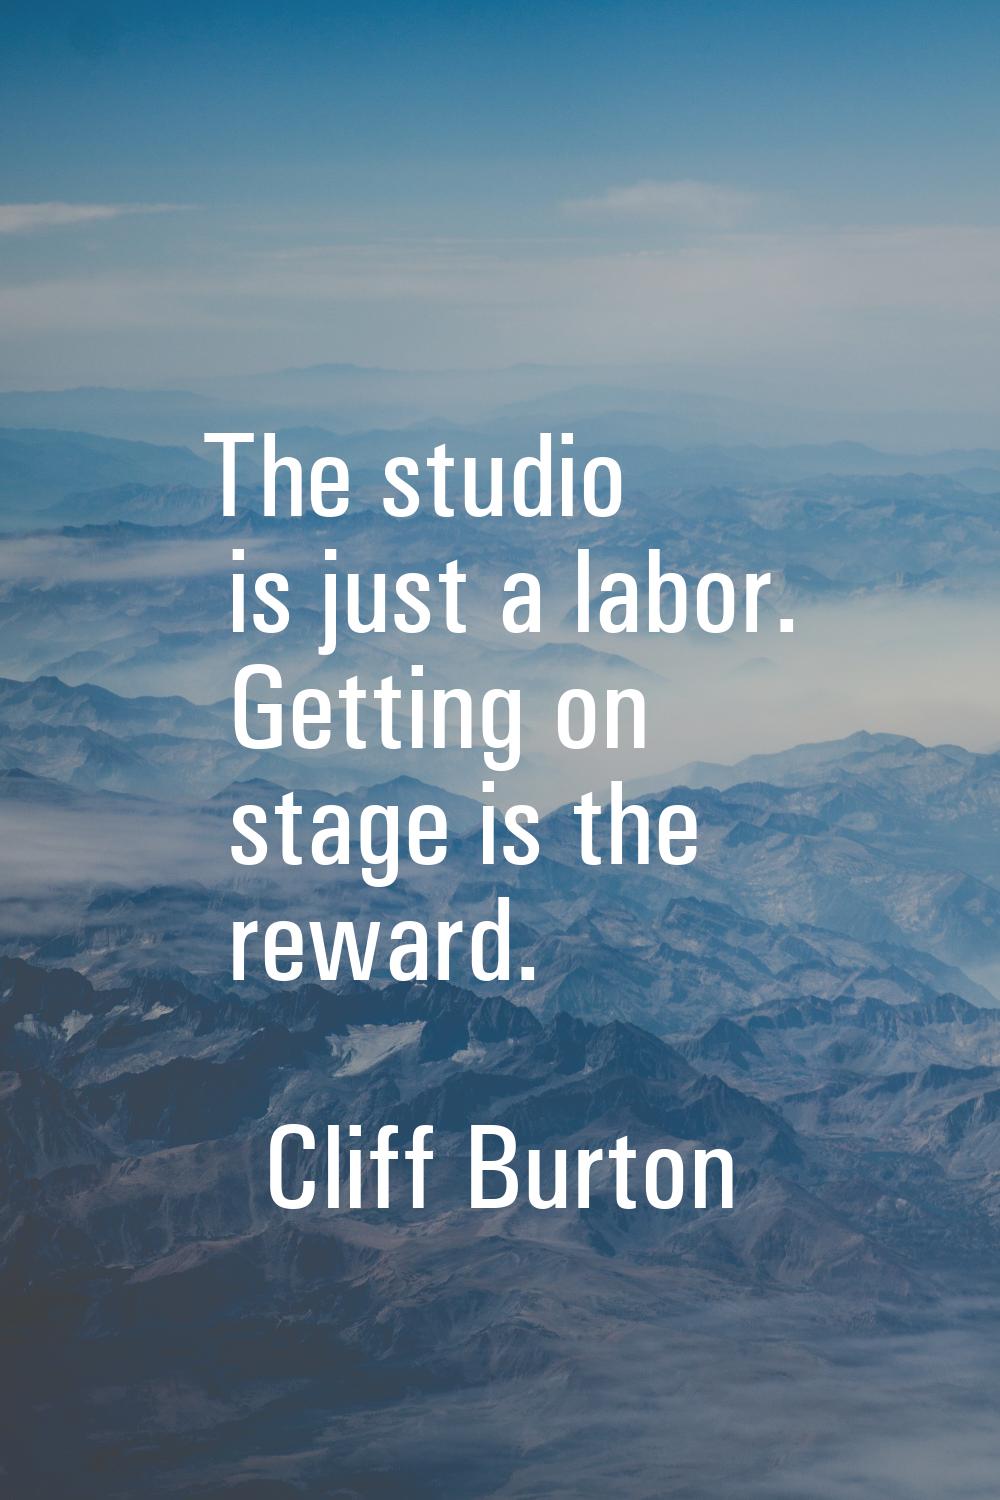 The studio is just a labor. Getting on stage is the reward.